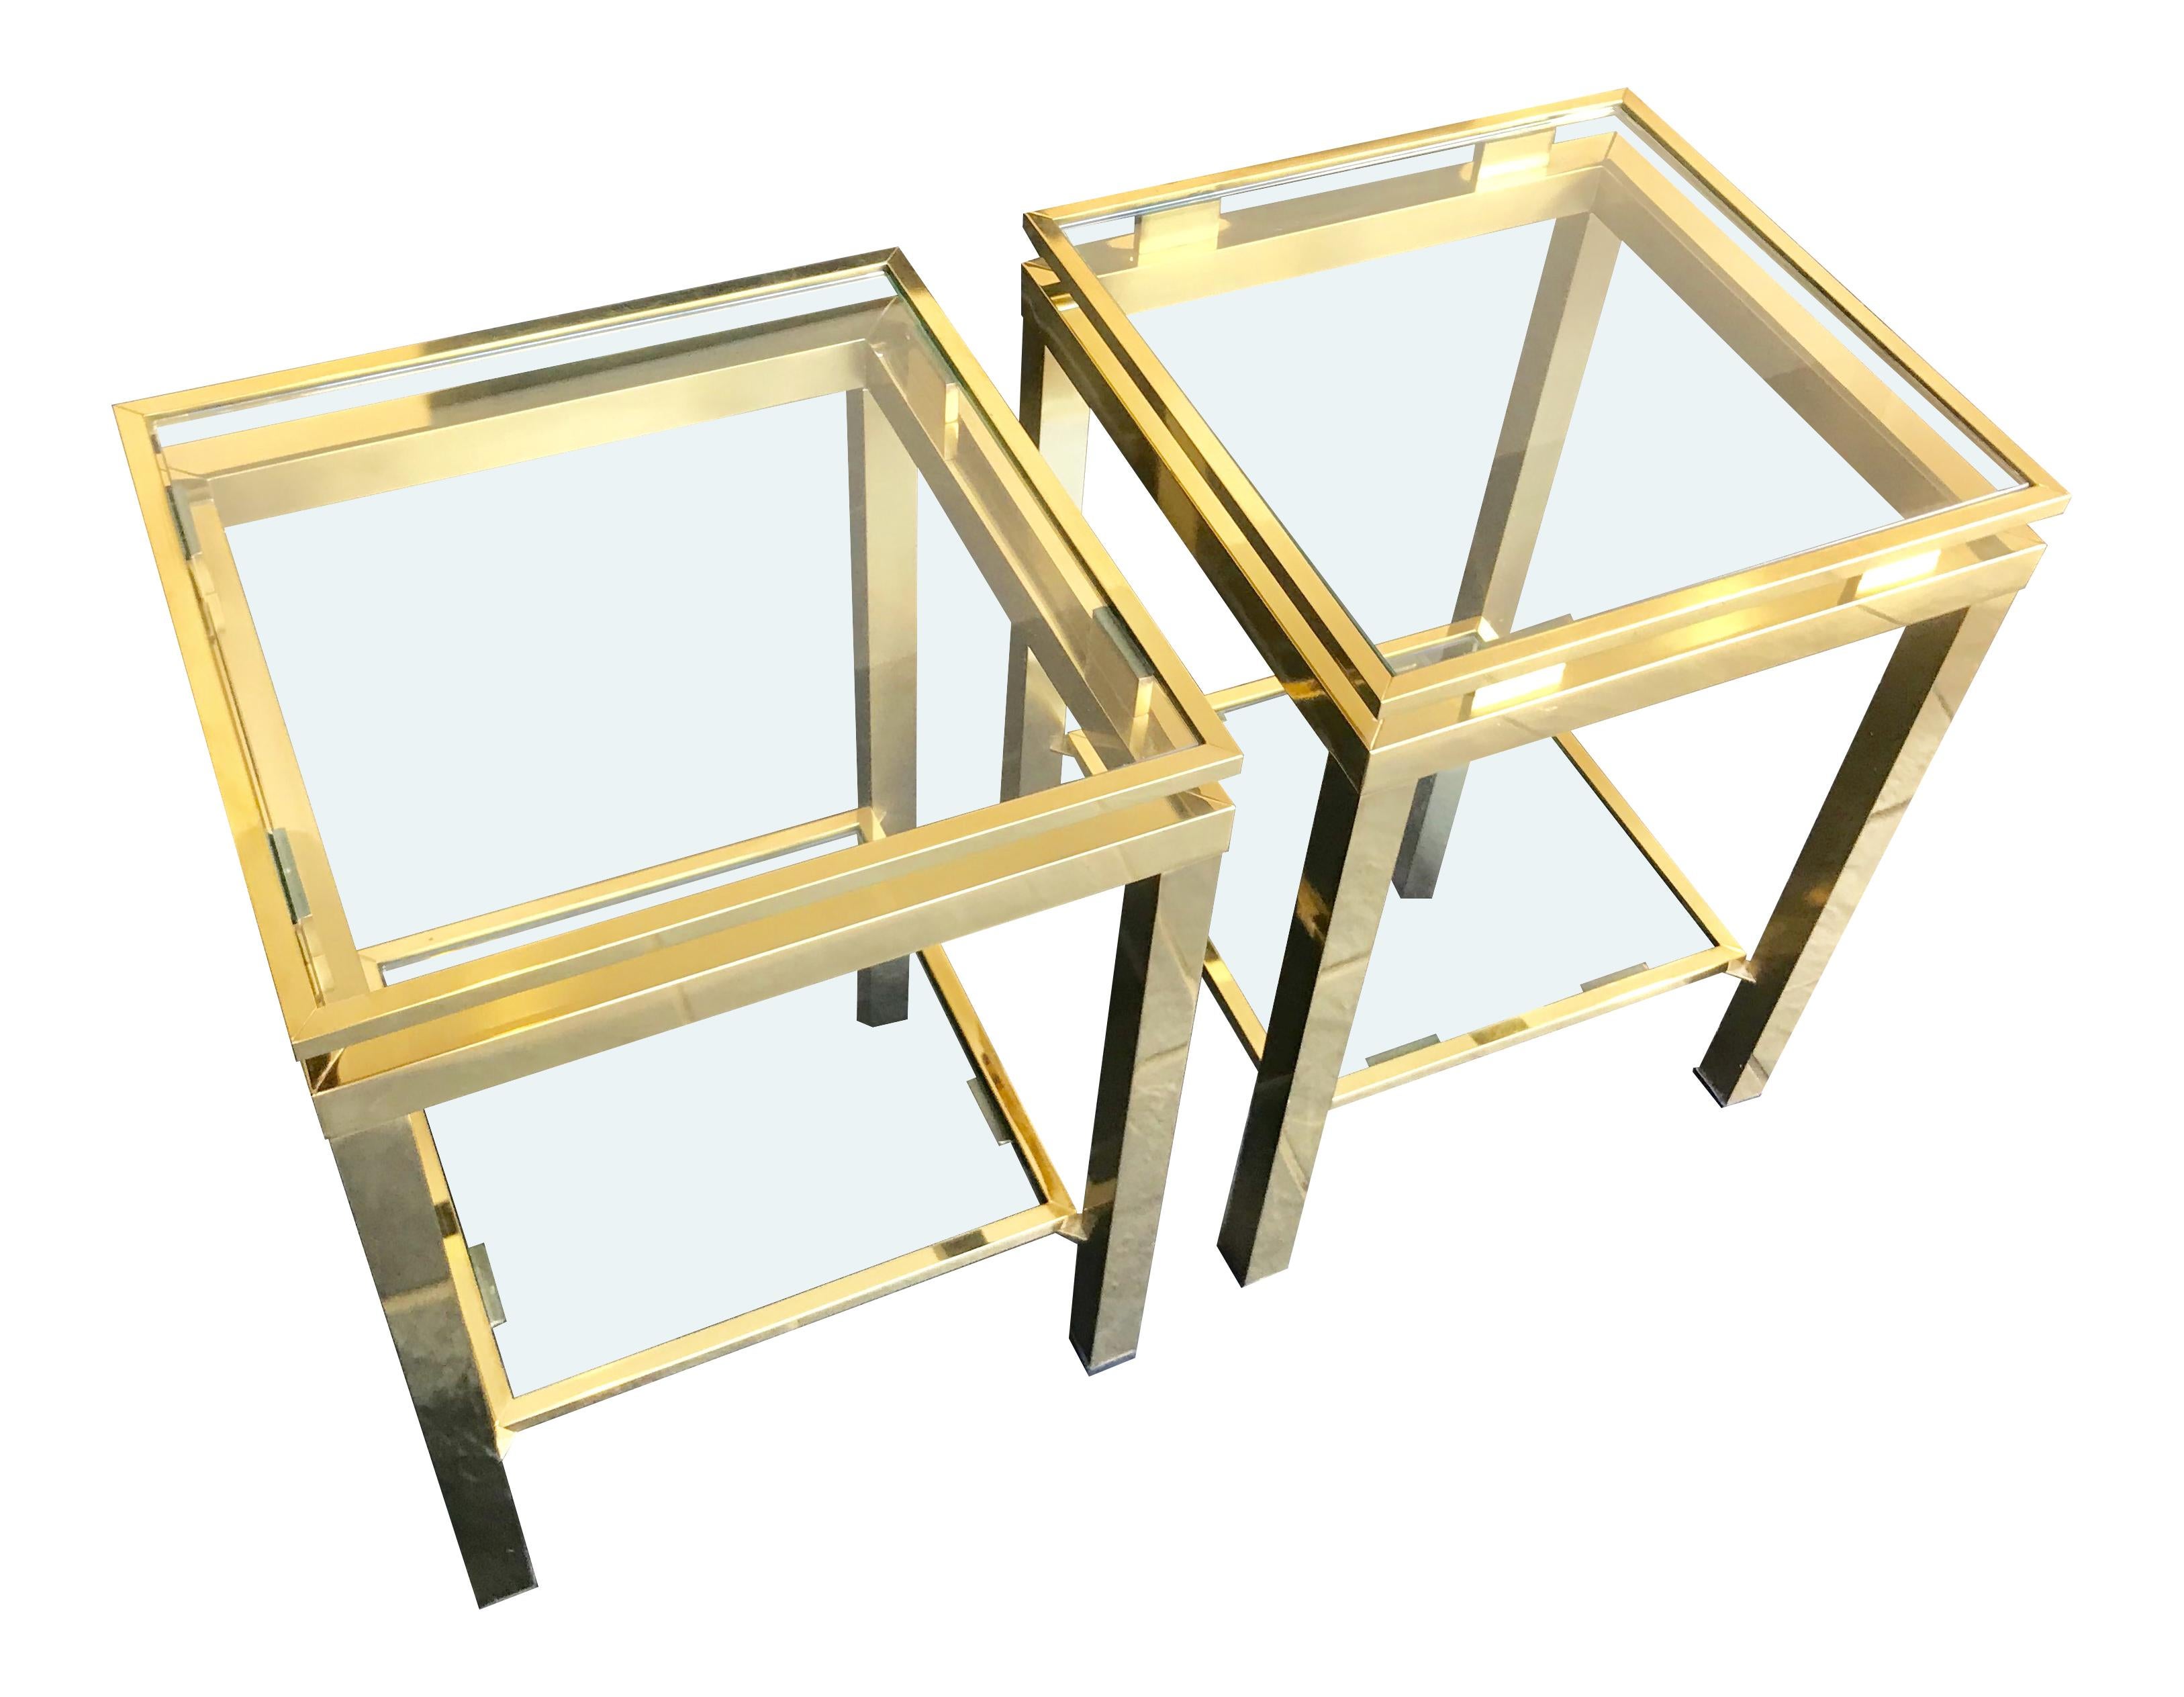 Mid-Century Modern Pair of Guy Lefevre Style Polished Gilt Metal Side Tables with 2 Glass Shelves